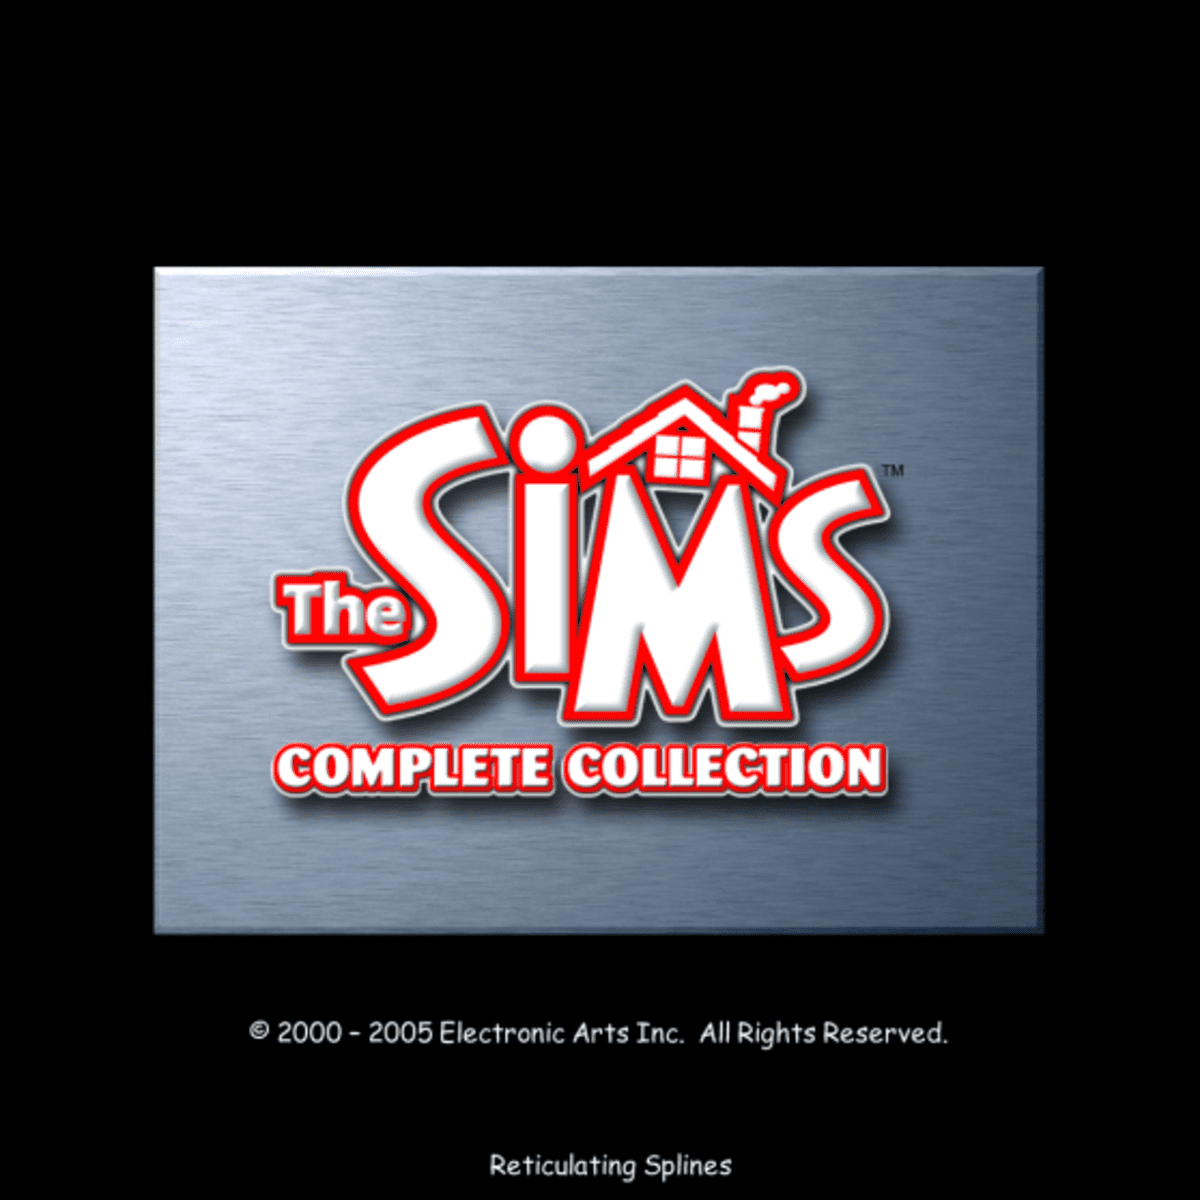 the sims 1 for mac